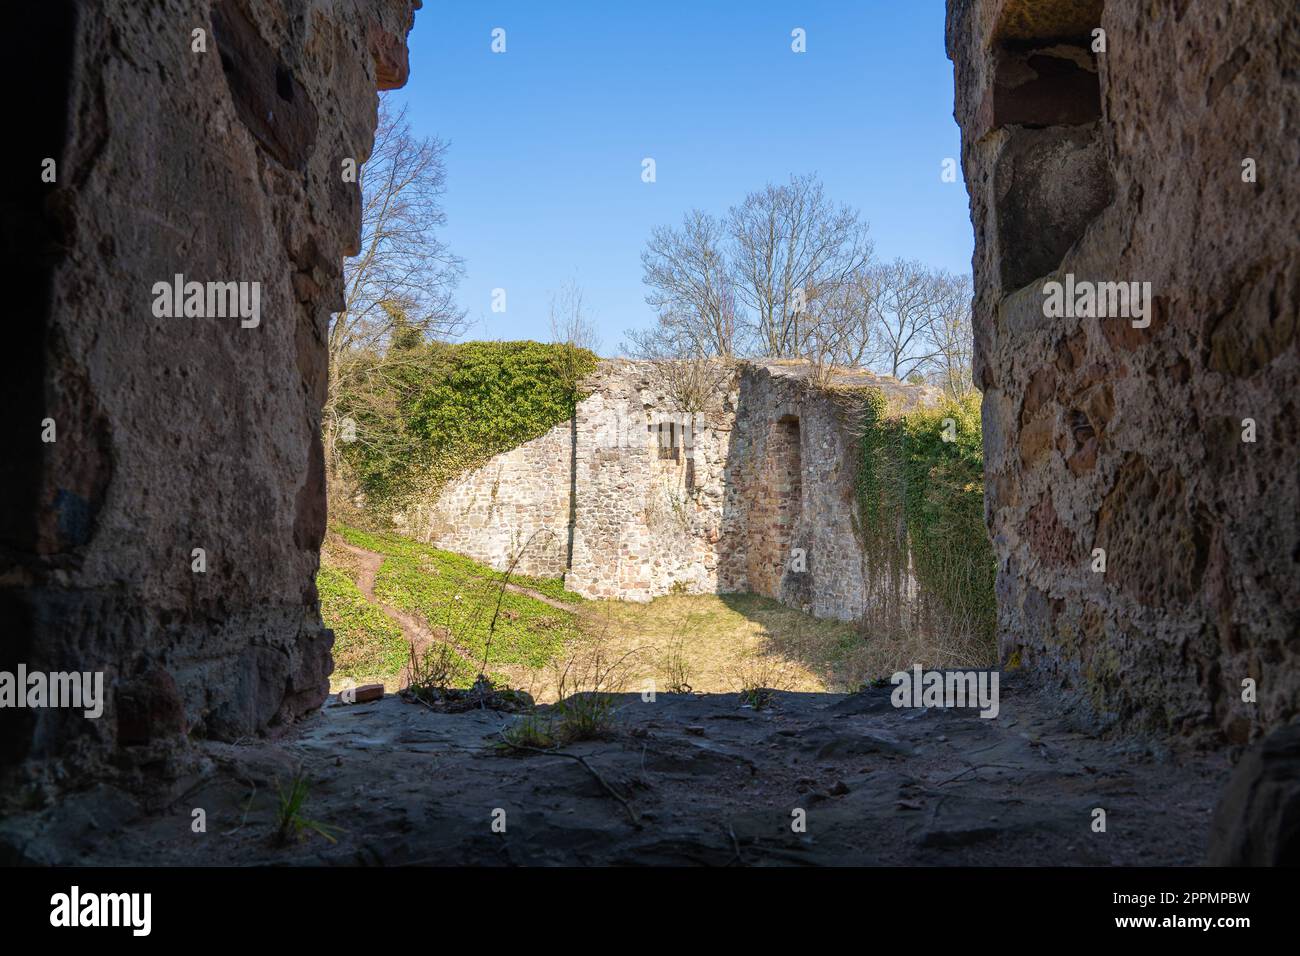 View through the window of a ruined castle Stock Photo